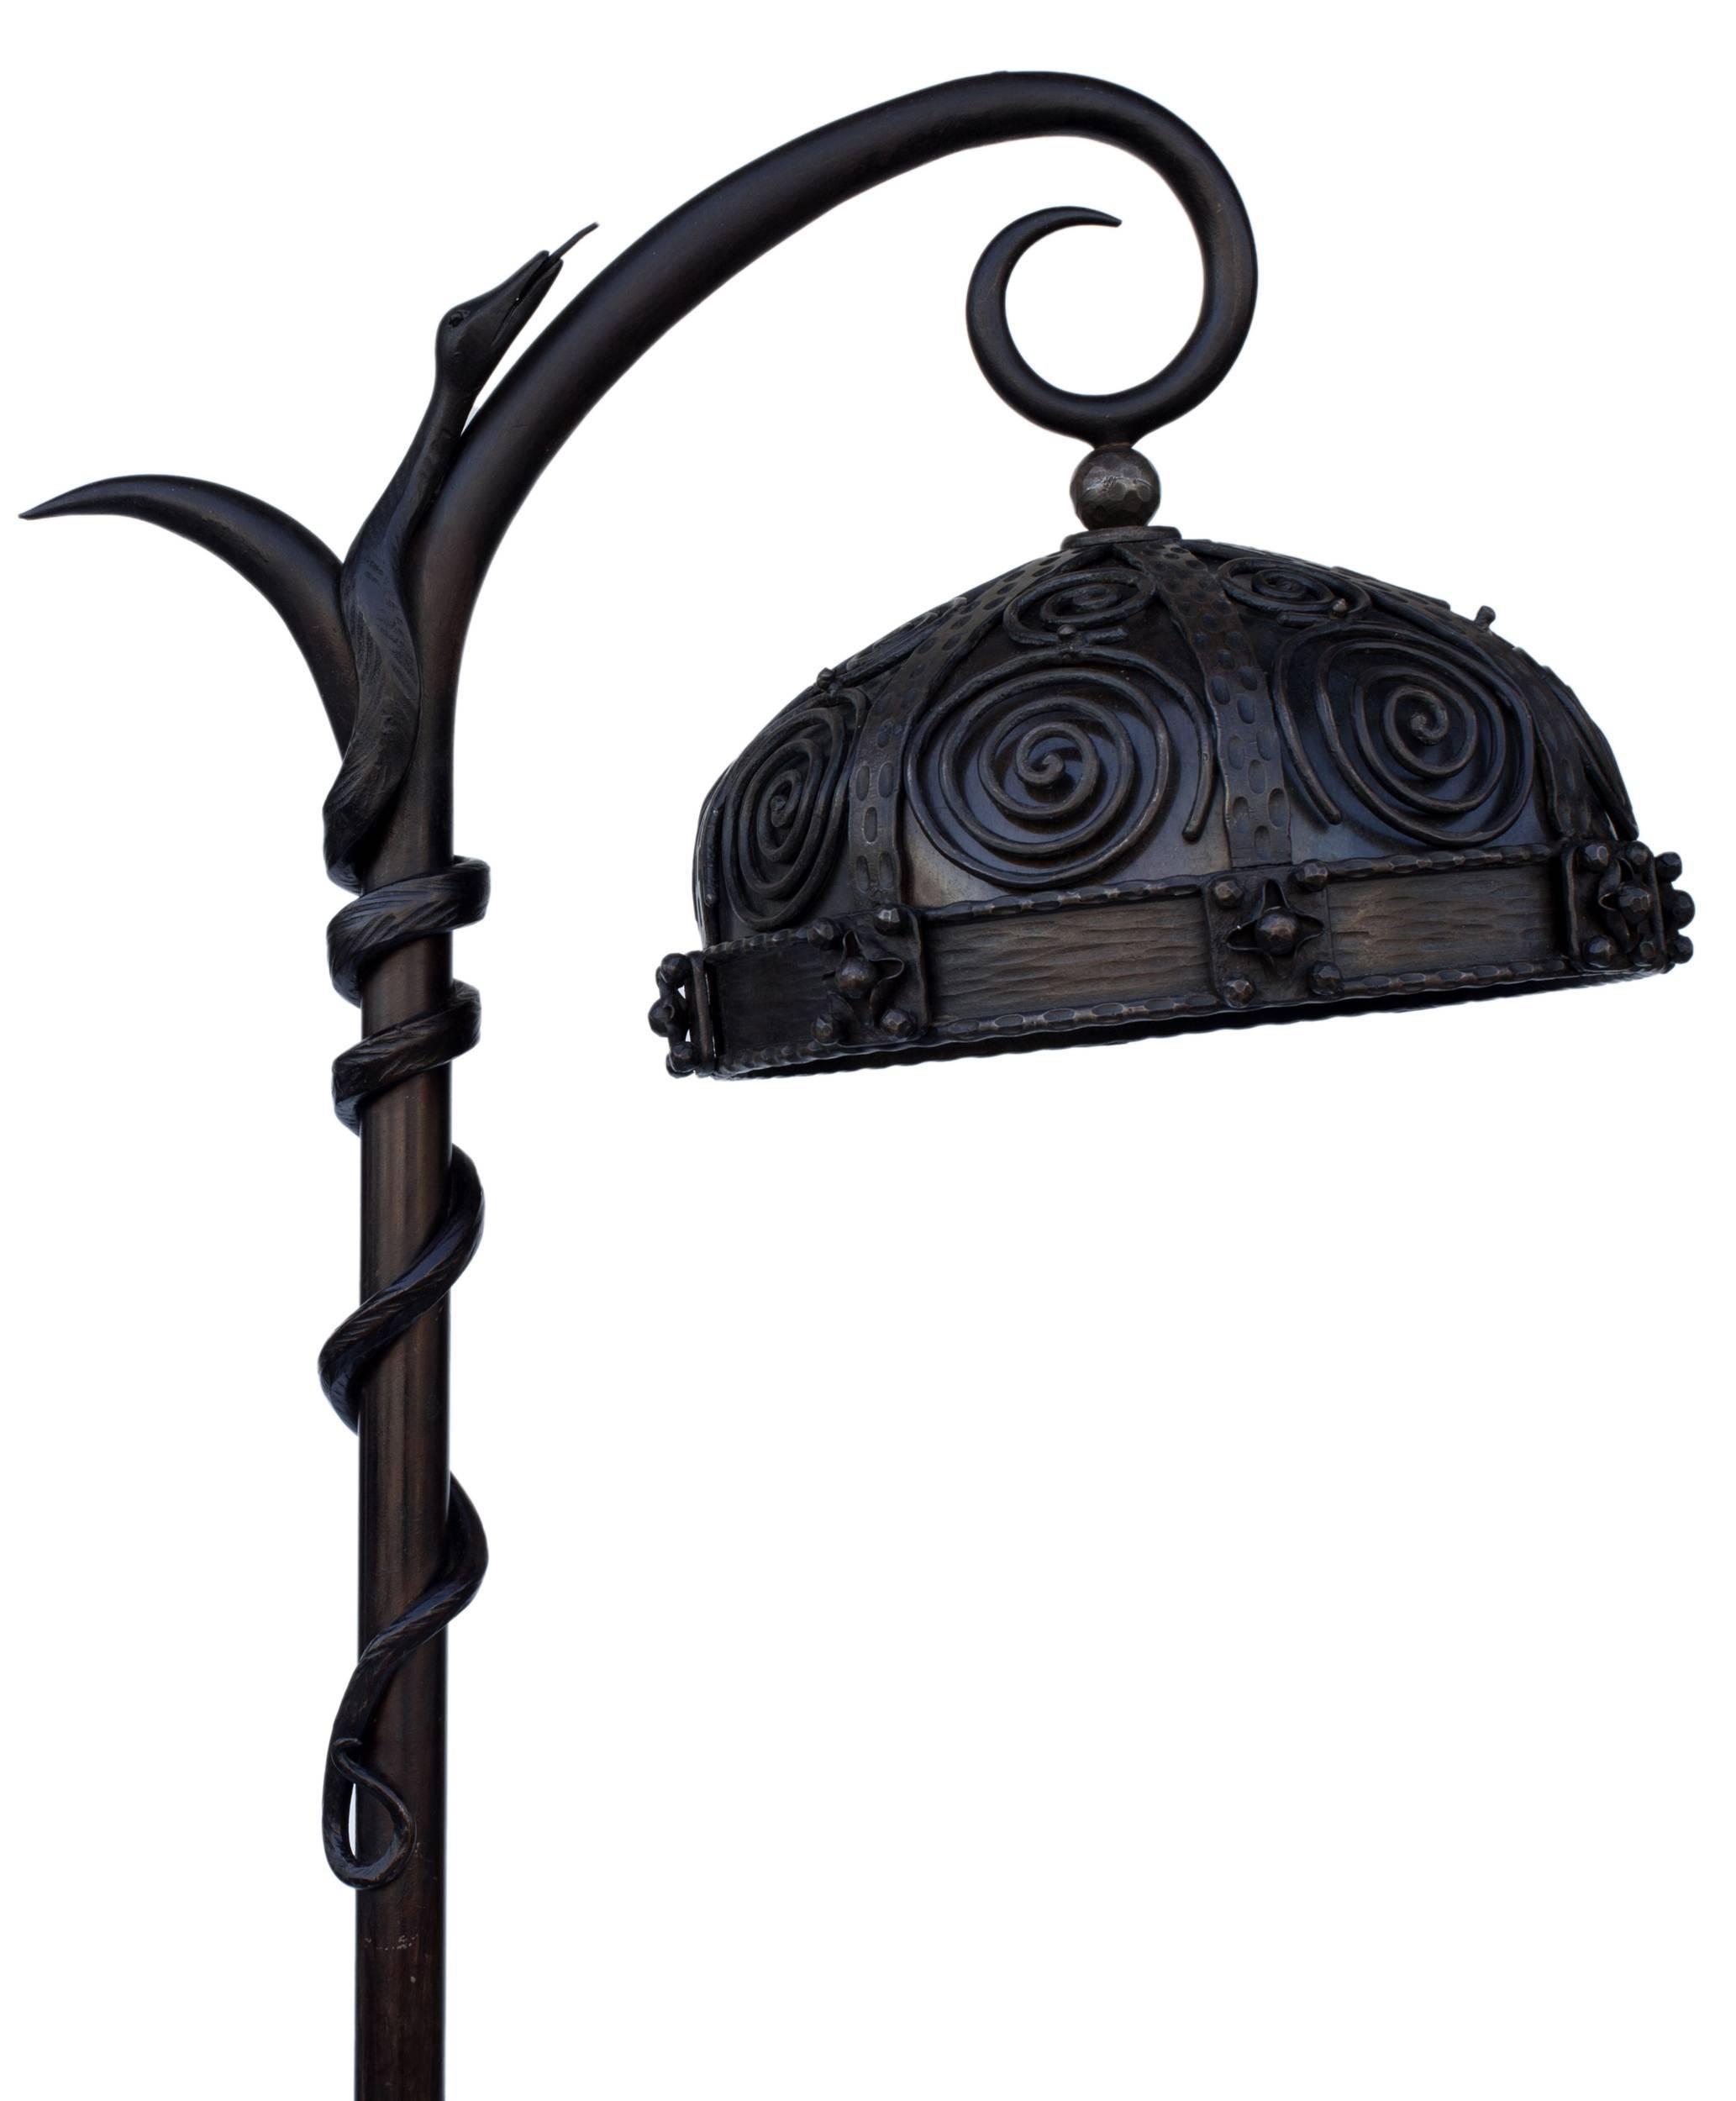 circa 1930 French Art Deco wrought-iron floor lamp. Applied scrollwork shade, the stem applied with a coiling snake, with another snake rising from the square beaded base. Exquisite piece. Provenance: renowned Interior designer Alberto Pinto. The